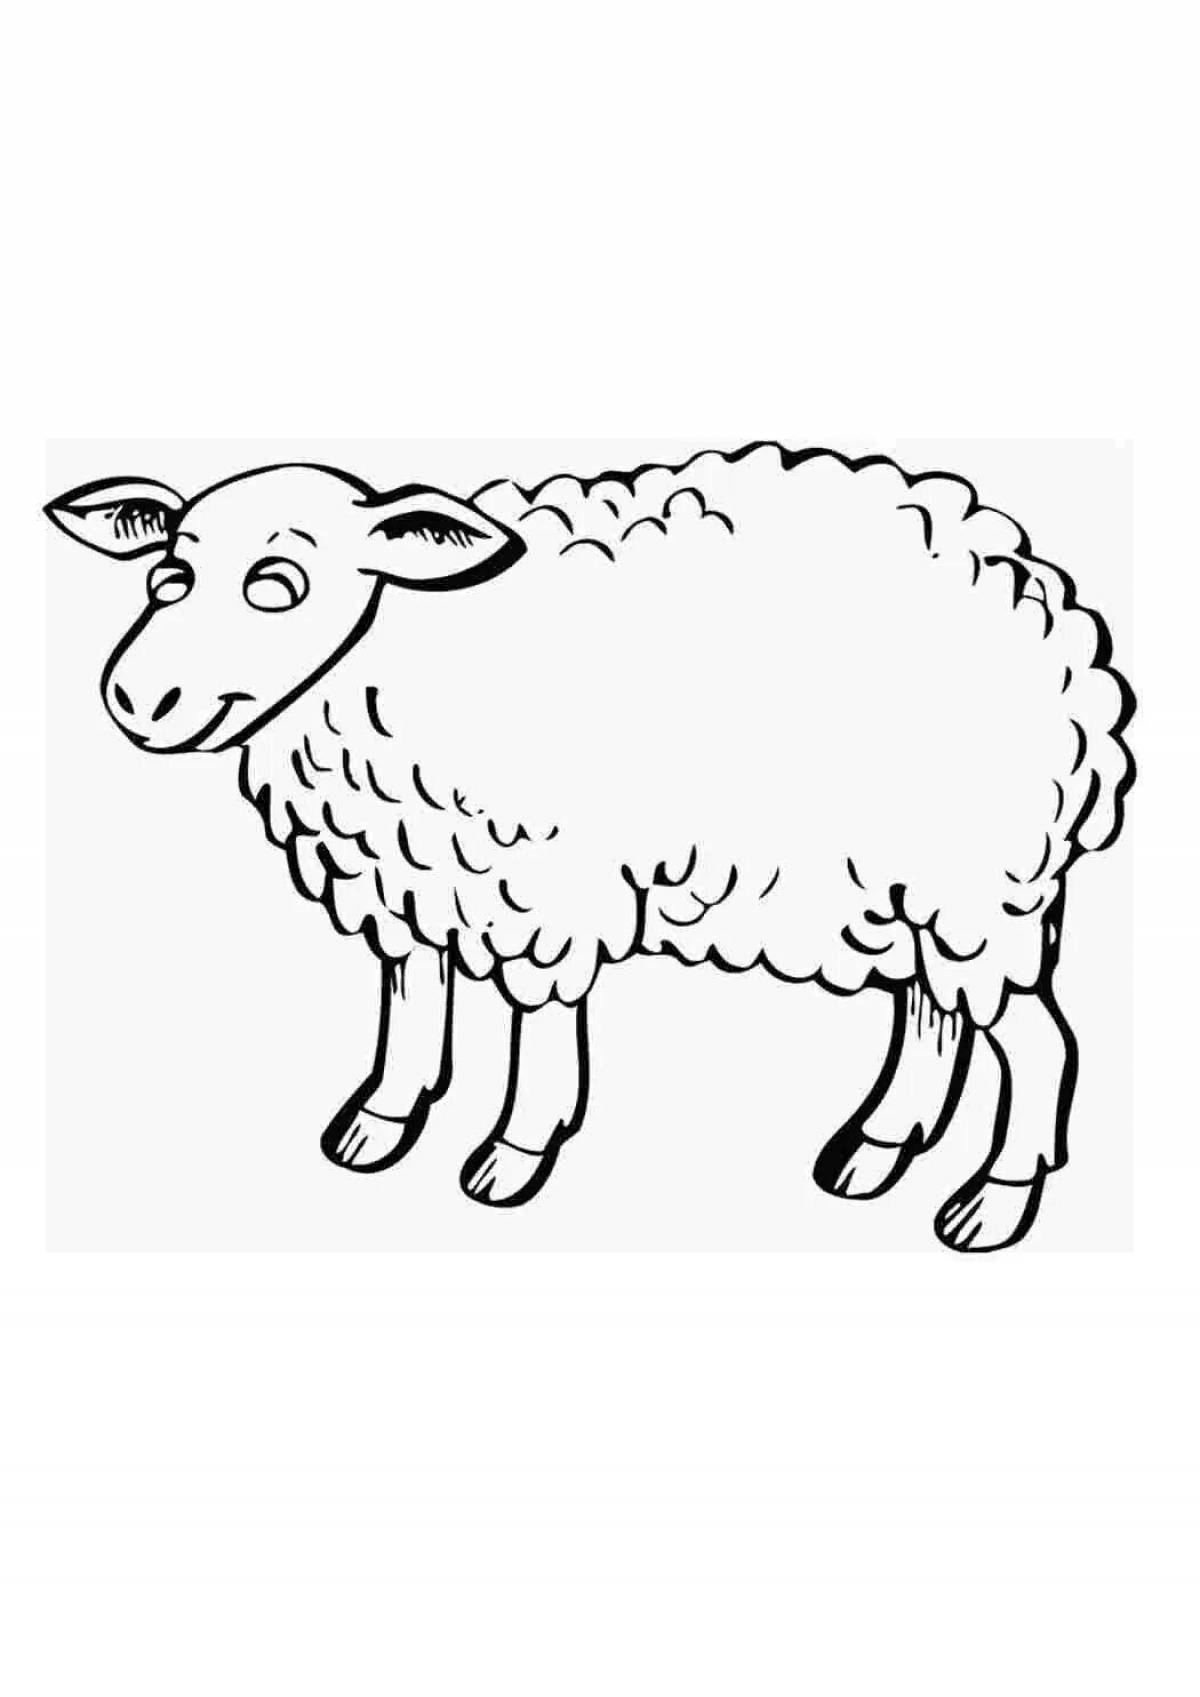 Funny sheep coloring book for kids